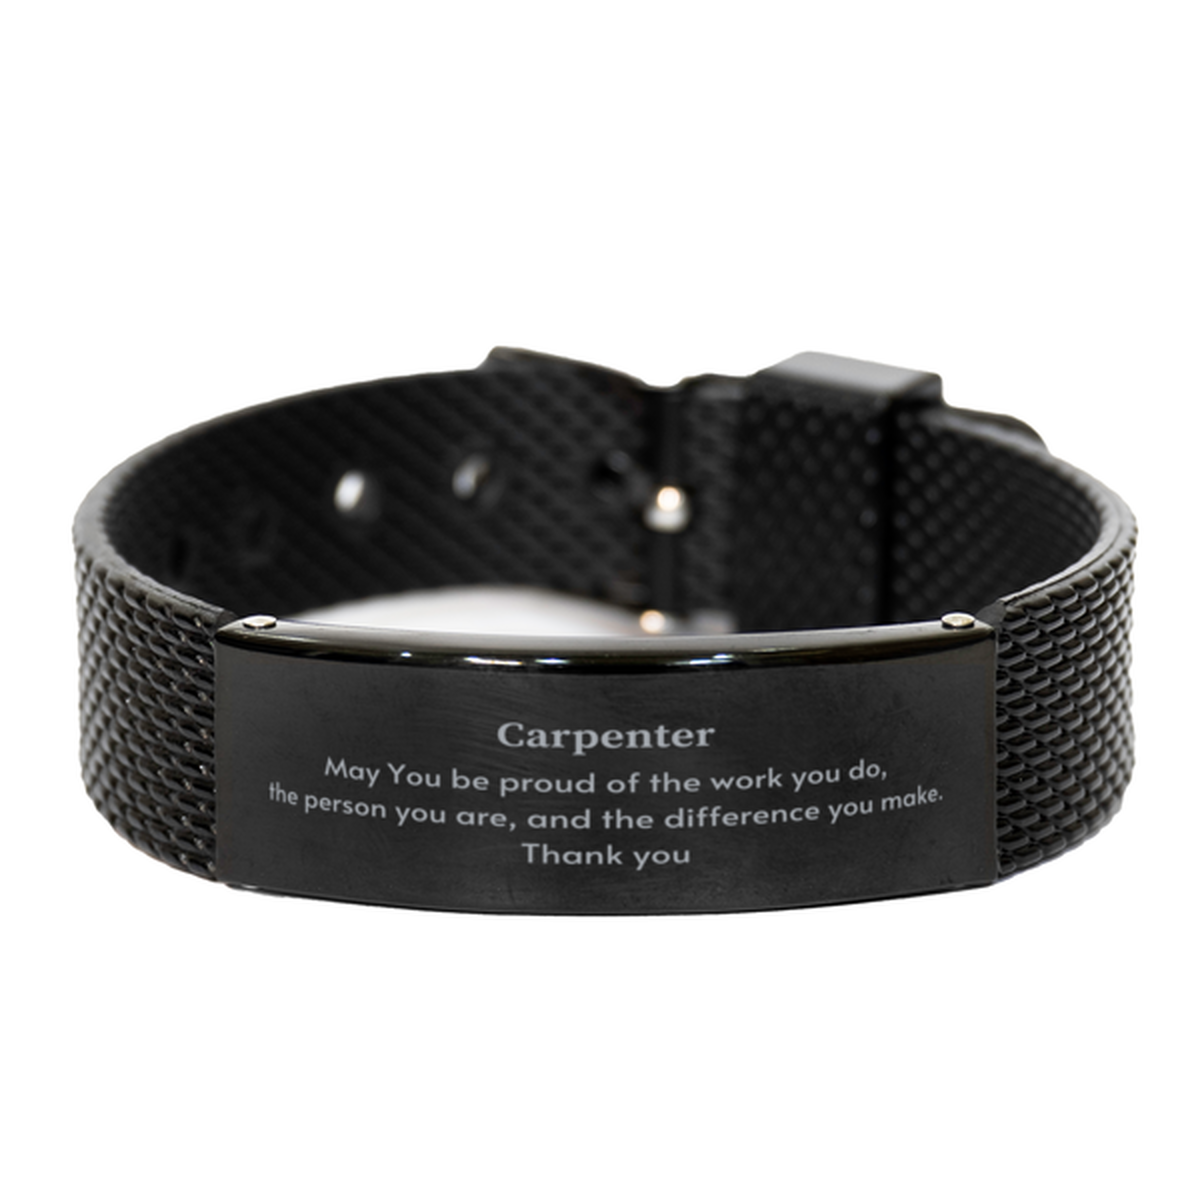 Heartwarming Black Shark Mesh Bracelet Retirement Coworkers Gifts for Carpenter, Carpenter May You be proud of the work you do, the person you are Gifts for Boss Men Women Friends